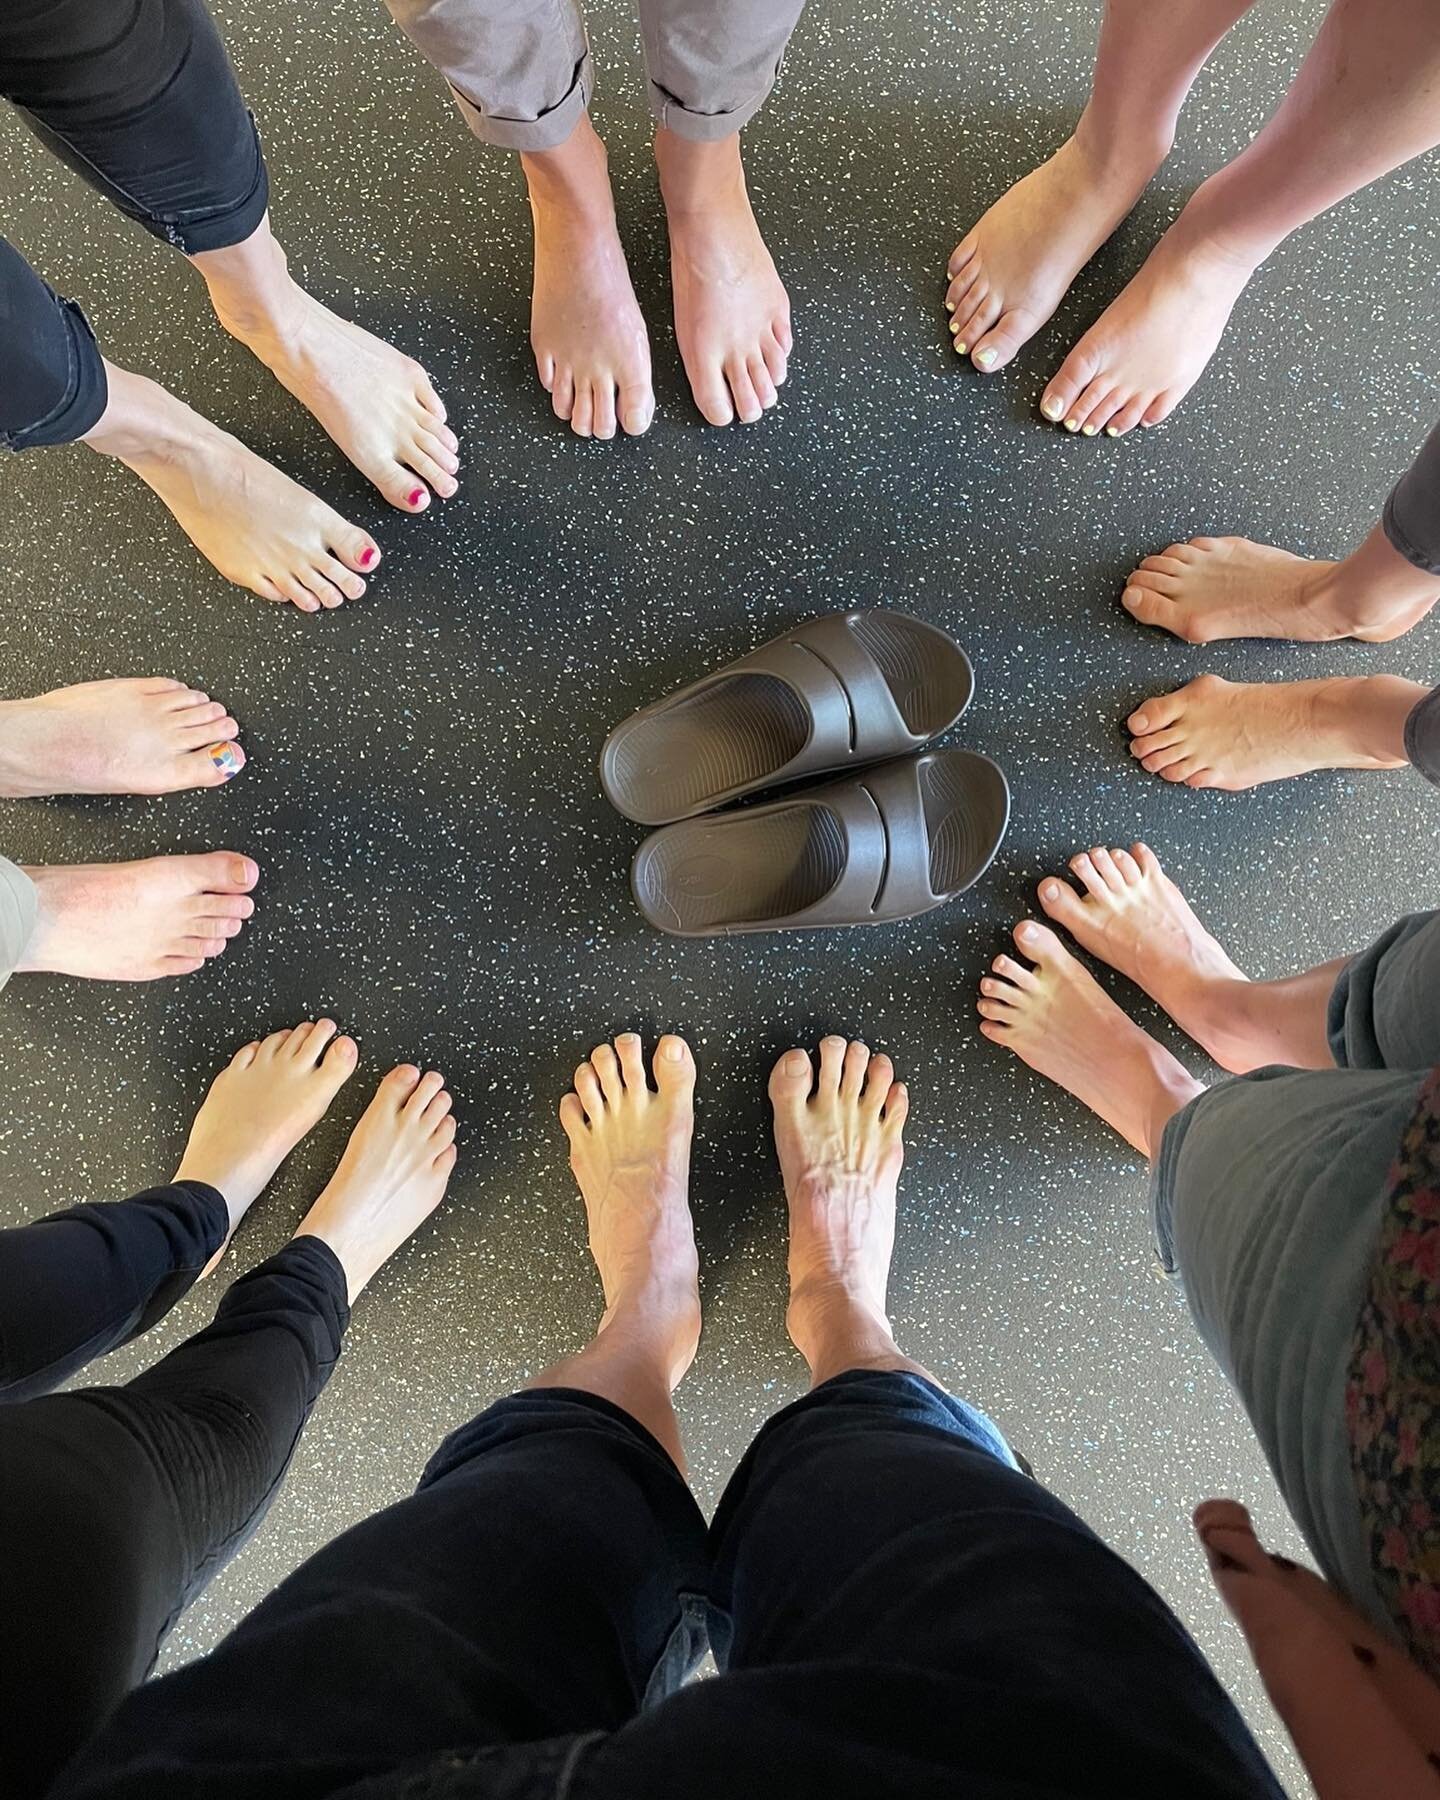 All types of feet walk through our doors and we are Missoula&rsquo;s foot and ankle PT specialists. From overuse injuries, to post-op physical therapy and custom orthotics, we&rsquo;ve got your feet covered!